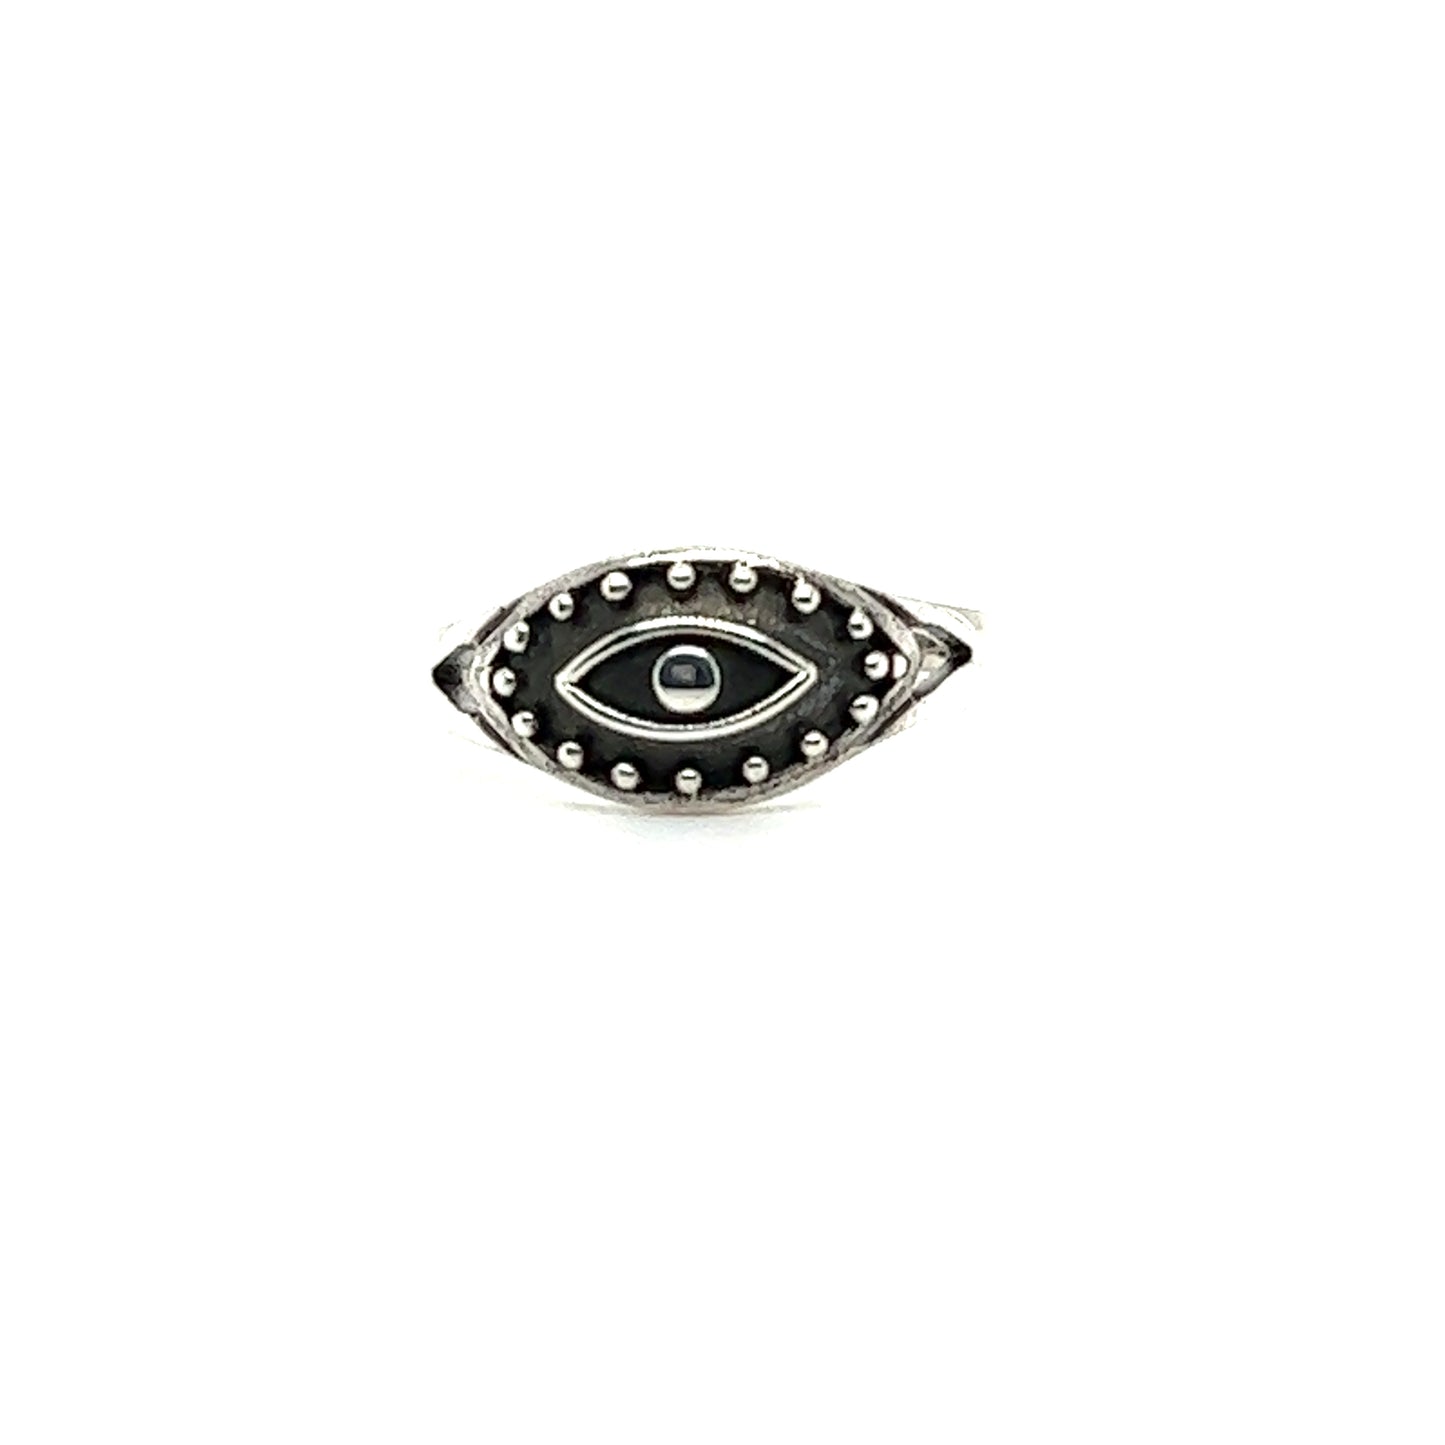 A minimalist Dotted Eye Ring on a white background.